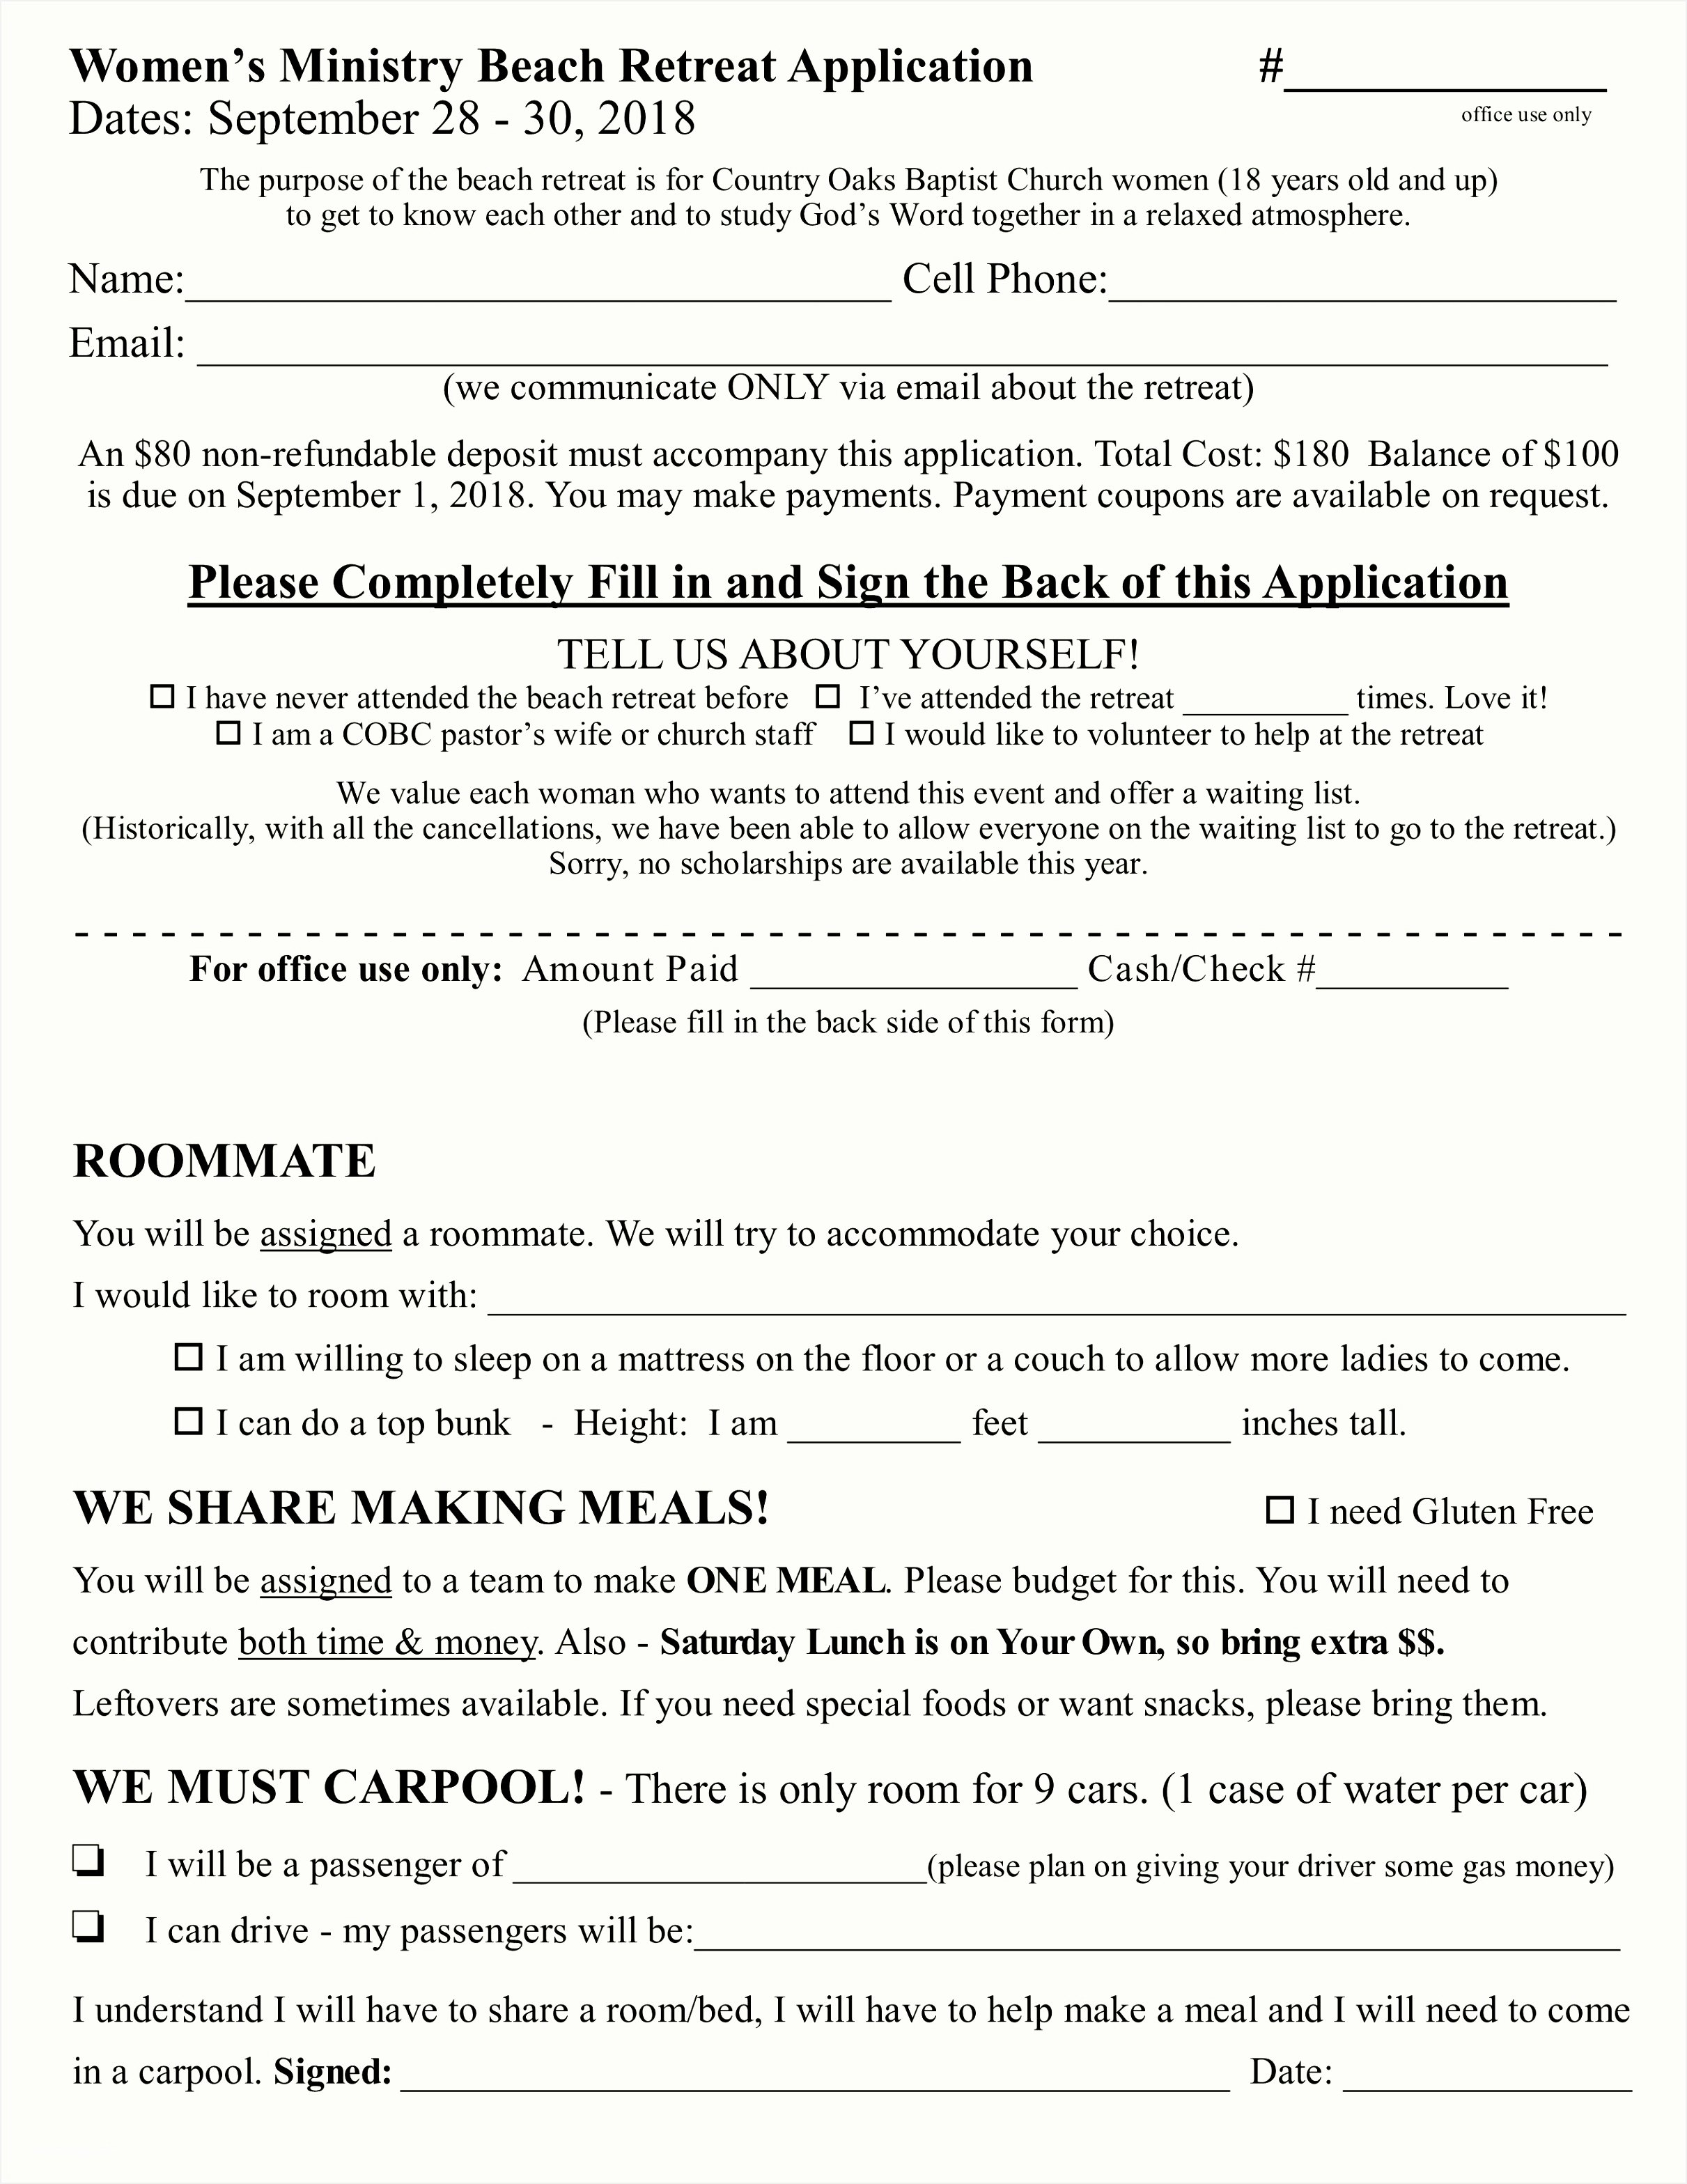 Roommate Agreement Template Word College Roommate Contract Template Best Of 6 Roommate Agreement